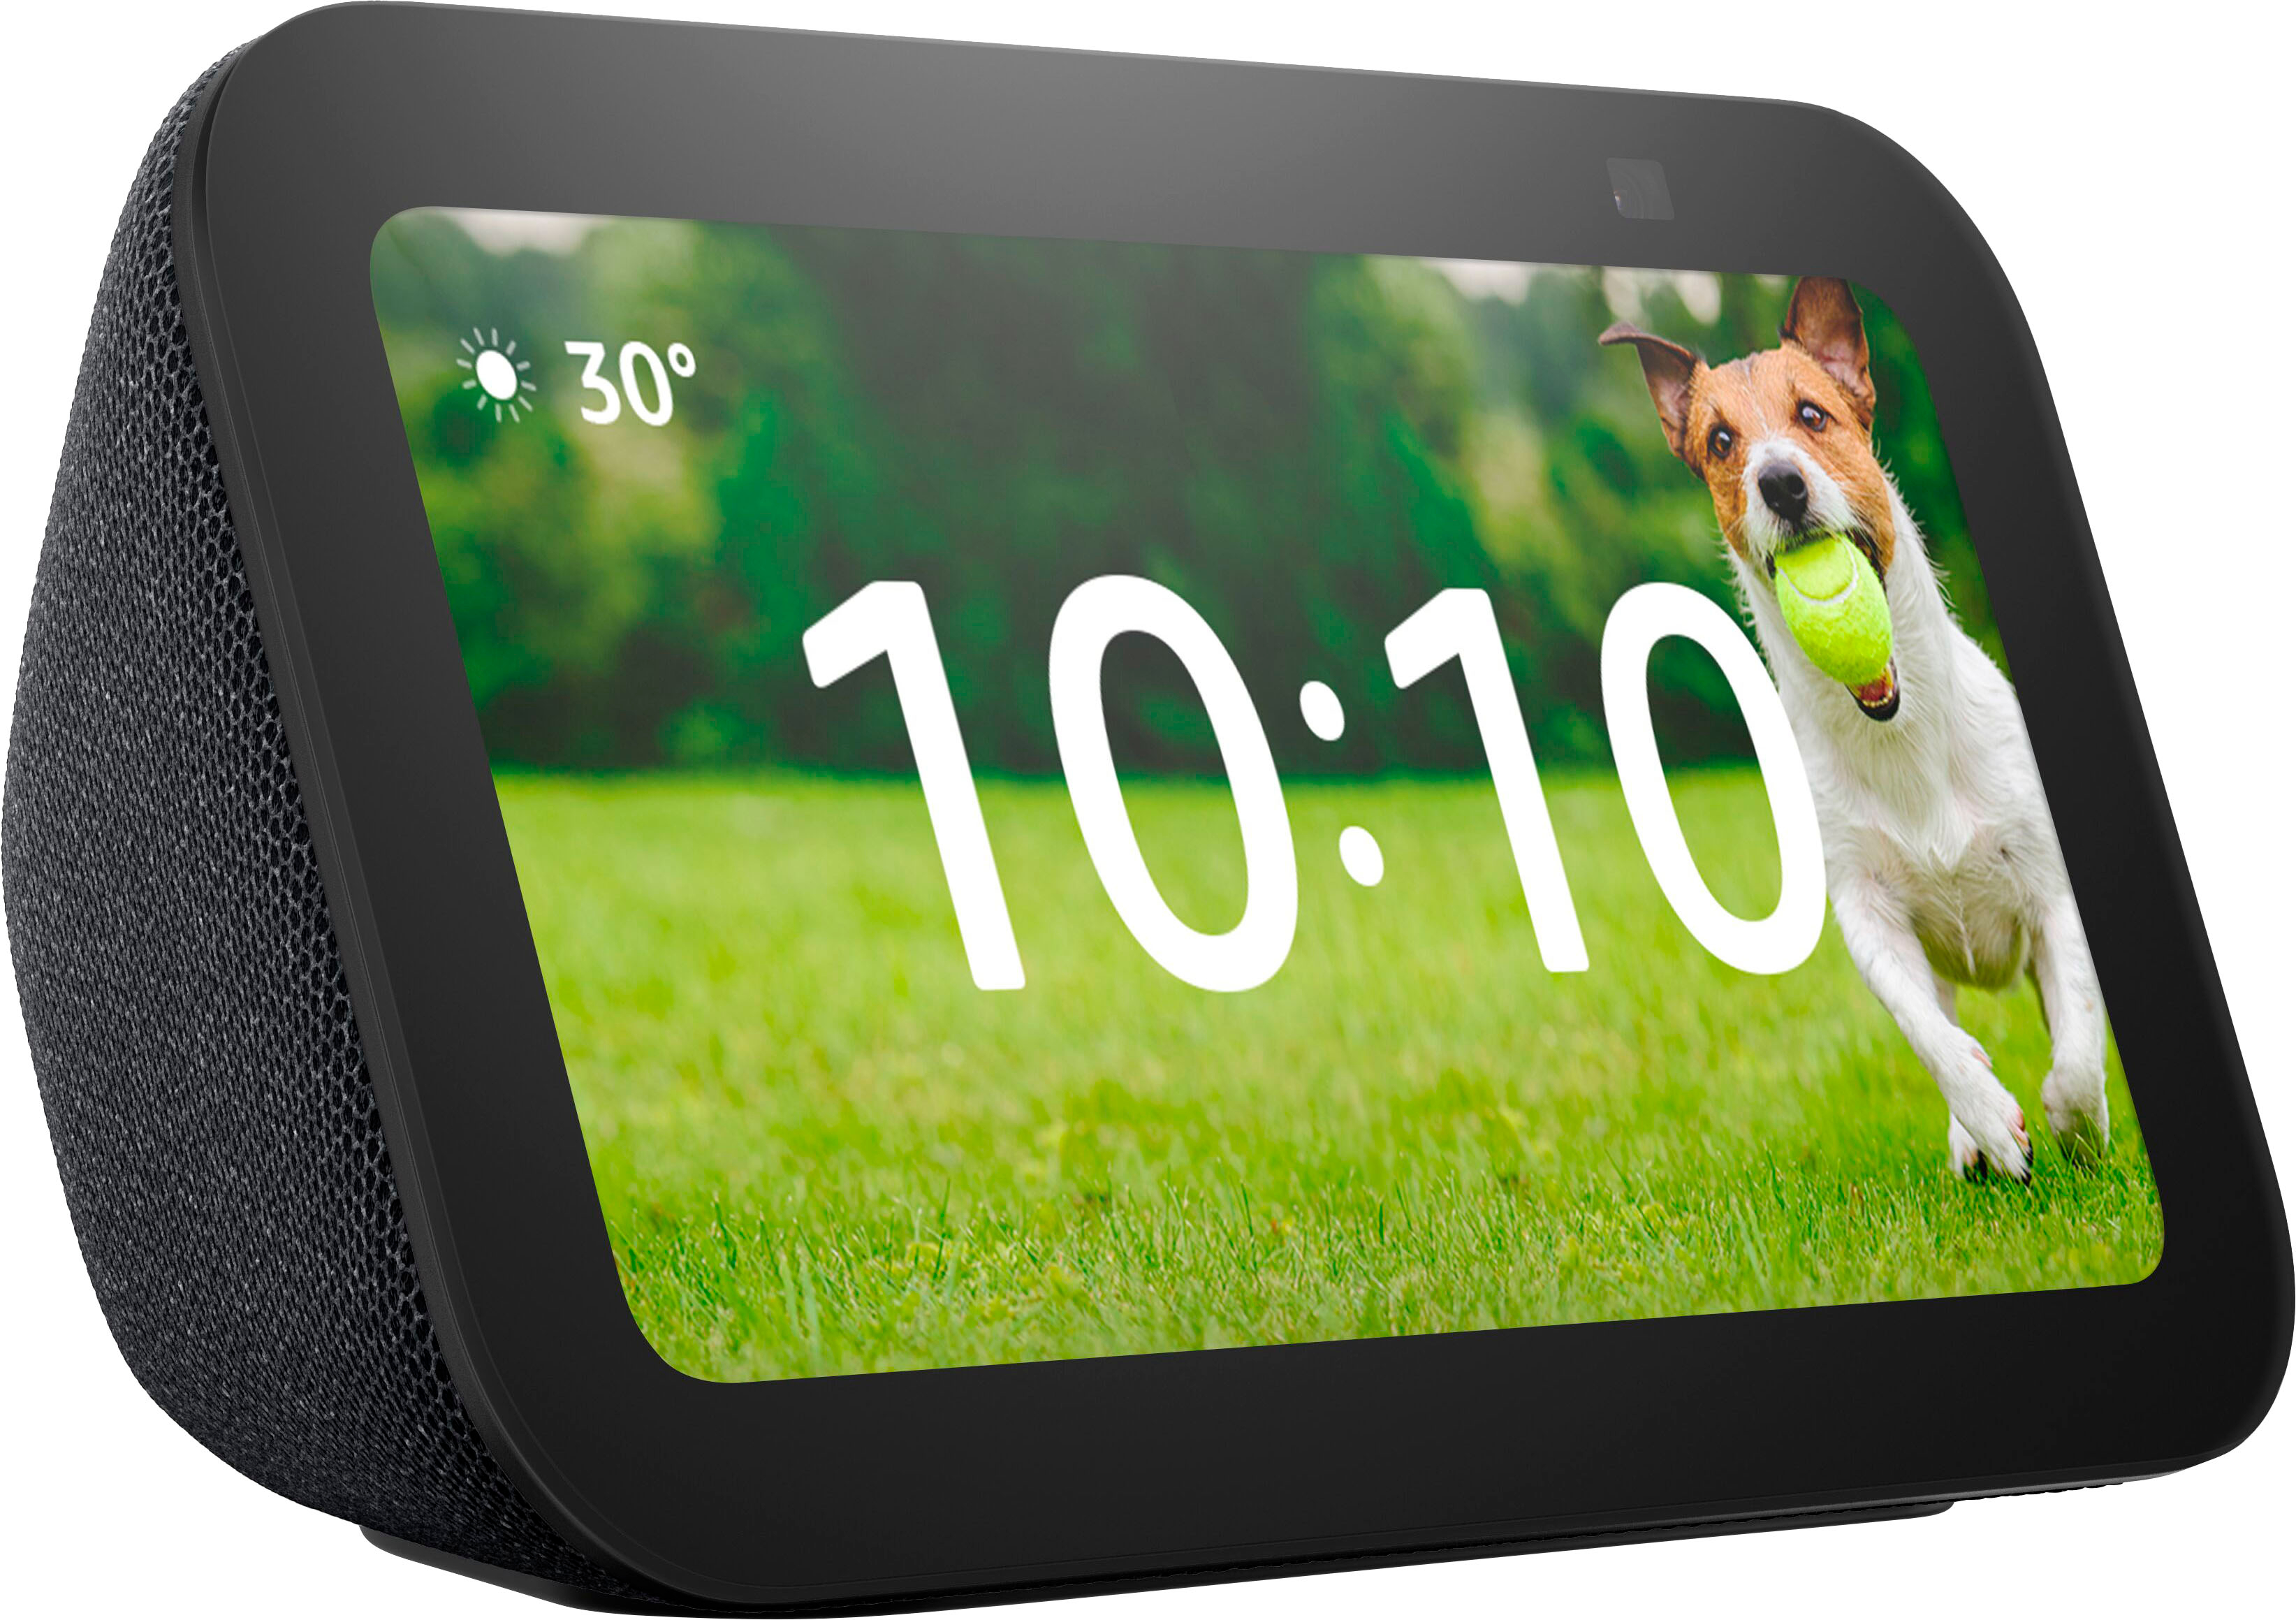 Echo Show 5 (3rd Generation) 5.5 inch Smart Display with